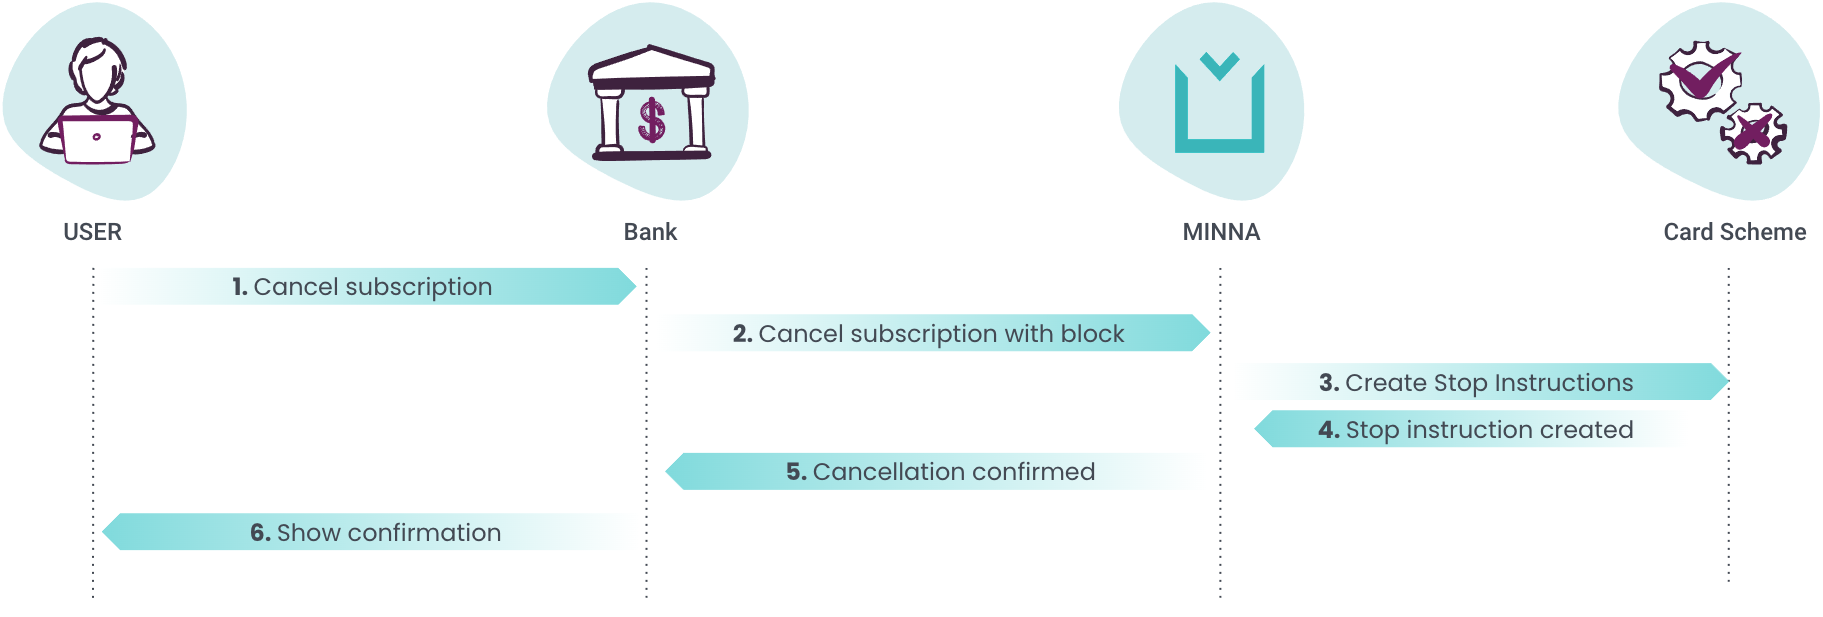 Technical flow for submitting a block payment (click on image for details)